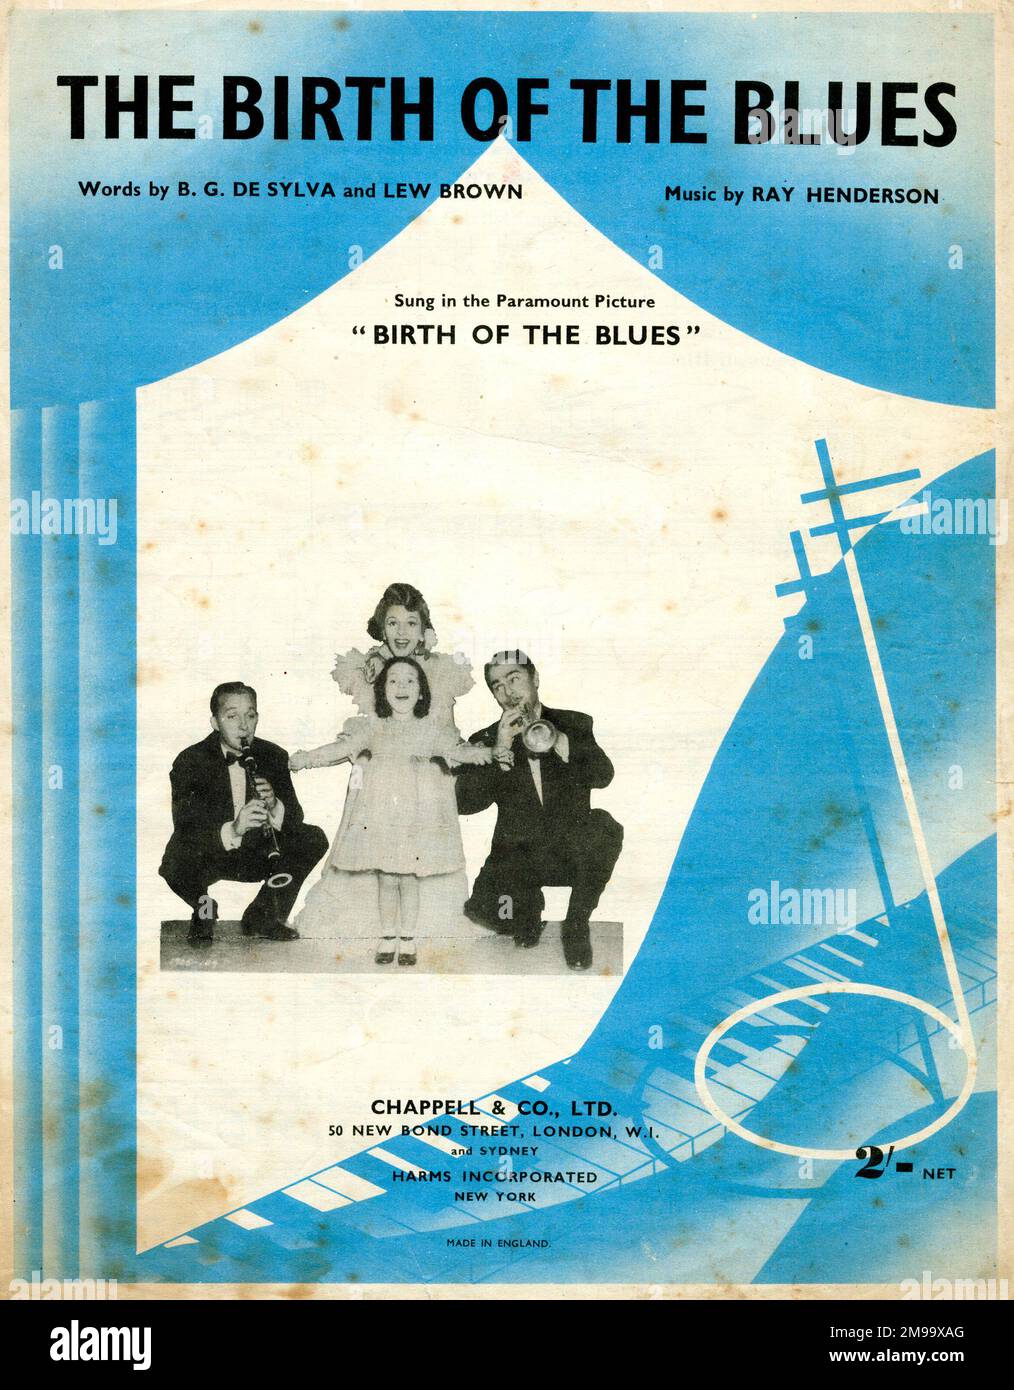 Couverture musicale, The Birth of the Blues, Words by B G de Sylva and Lew Brown, musique de Ray Henderson. Banque D'Images